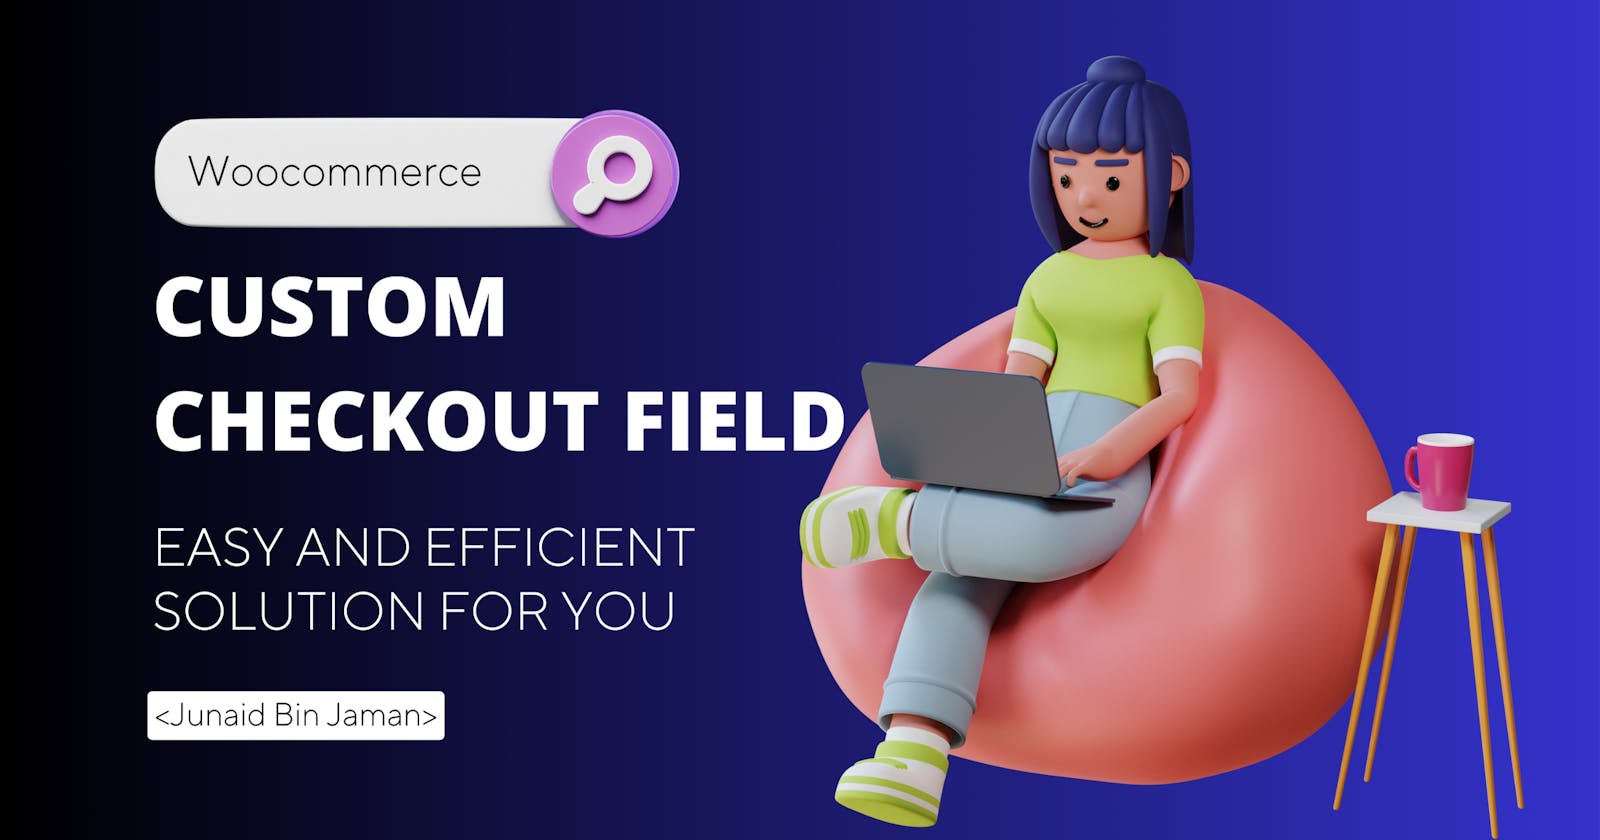 How to Add a Custom Field to Your WooCommerce Checkout Page